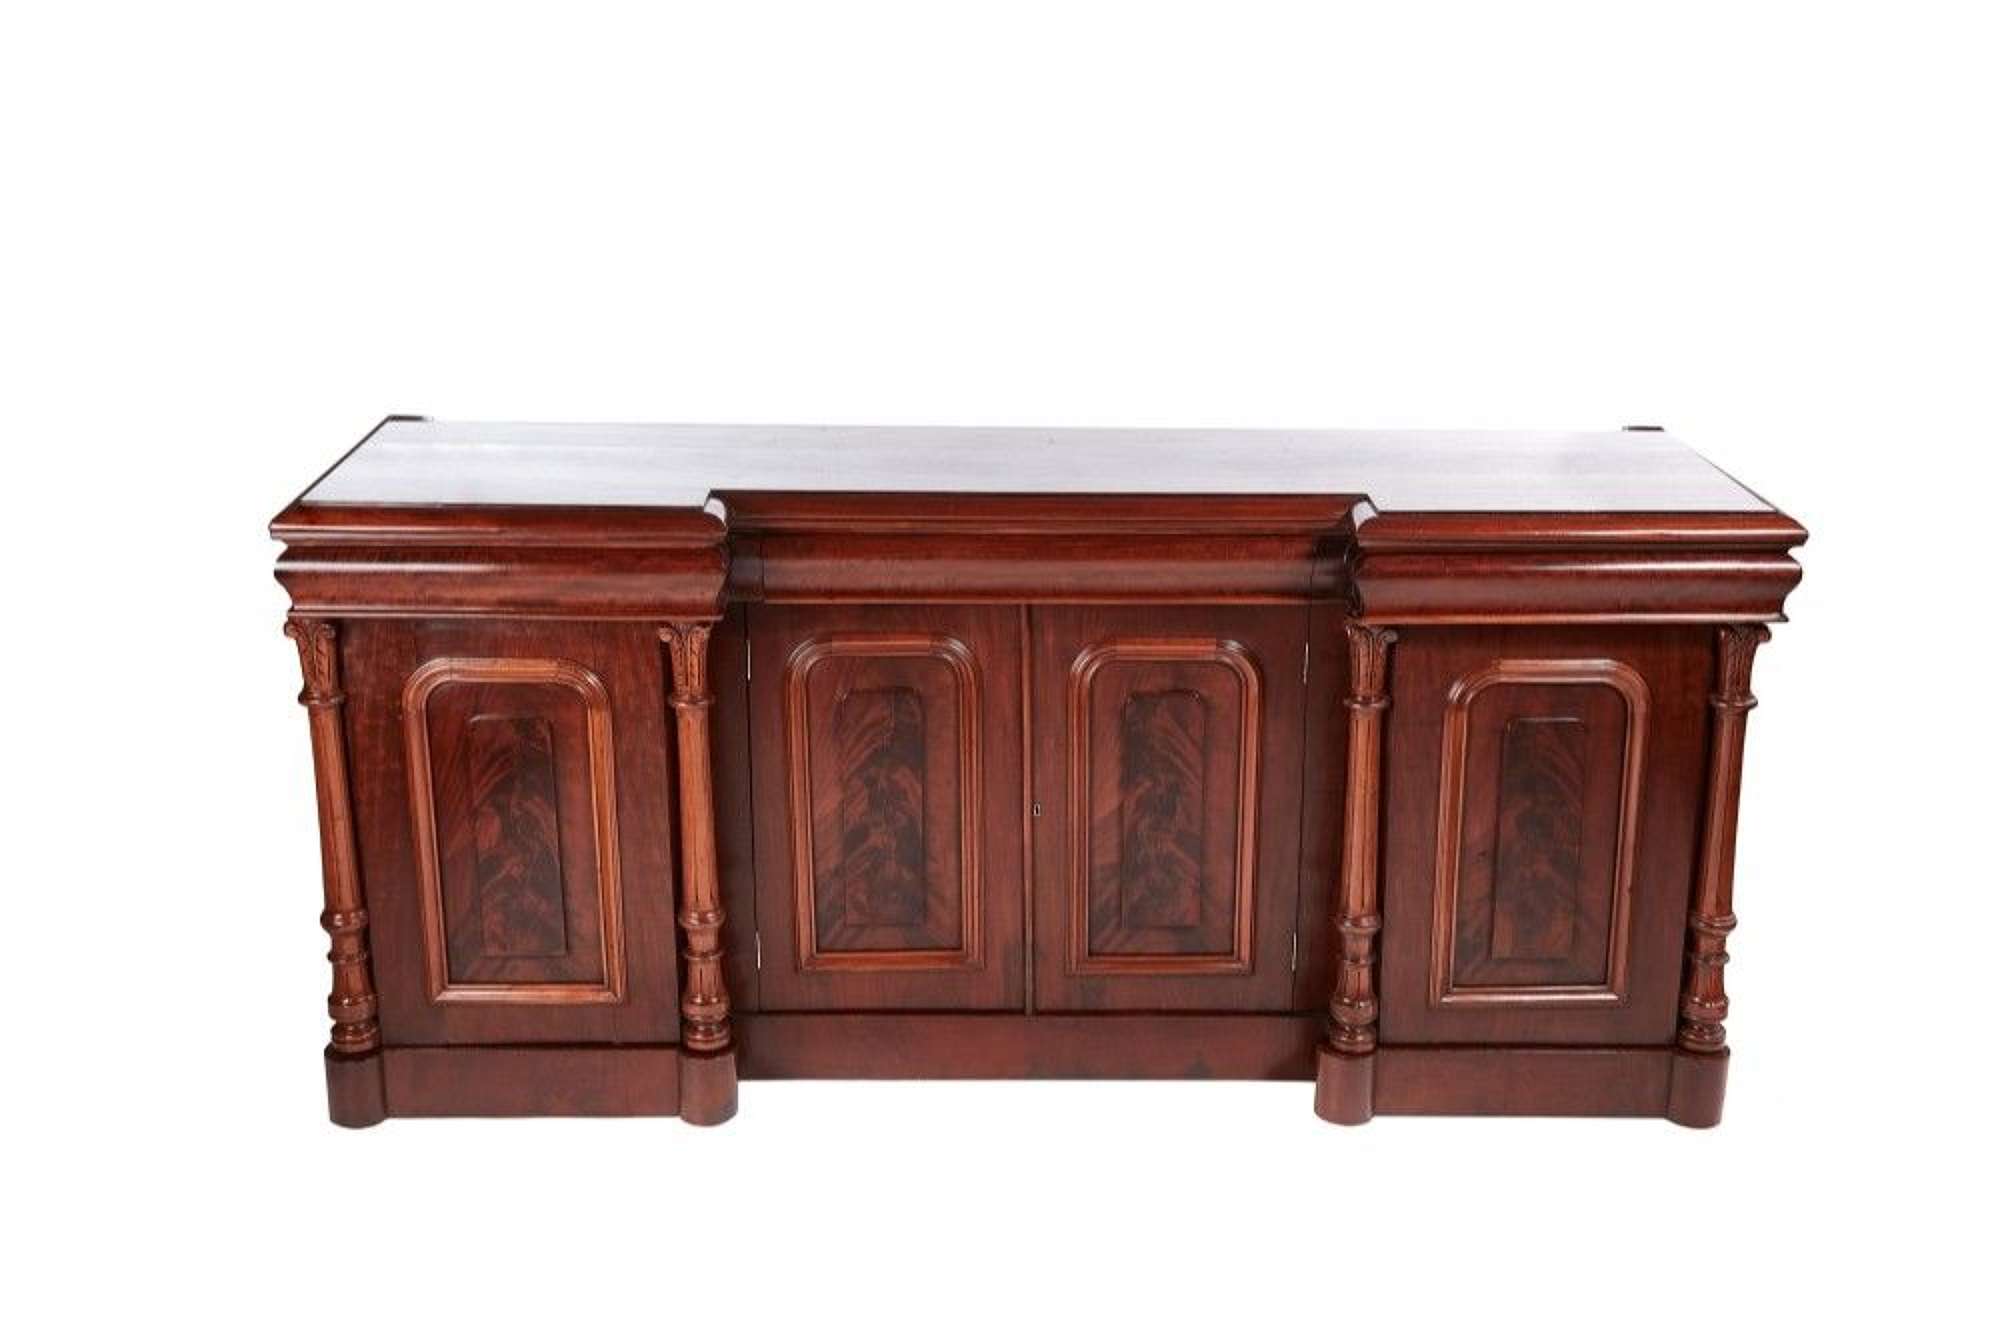 Outstanding Quality Antique Victorian Mahogany Mirrored Sideboard